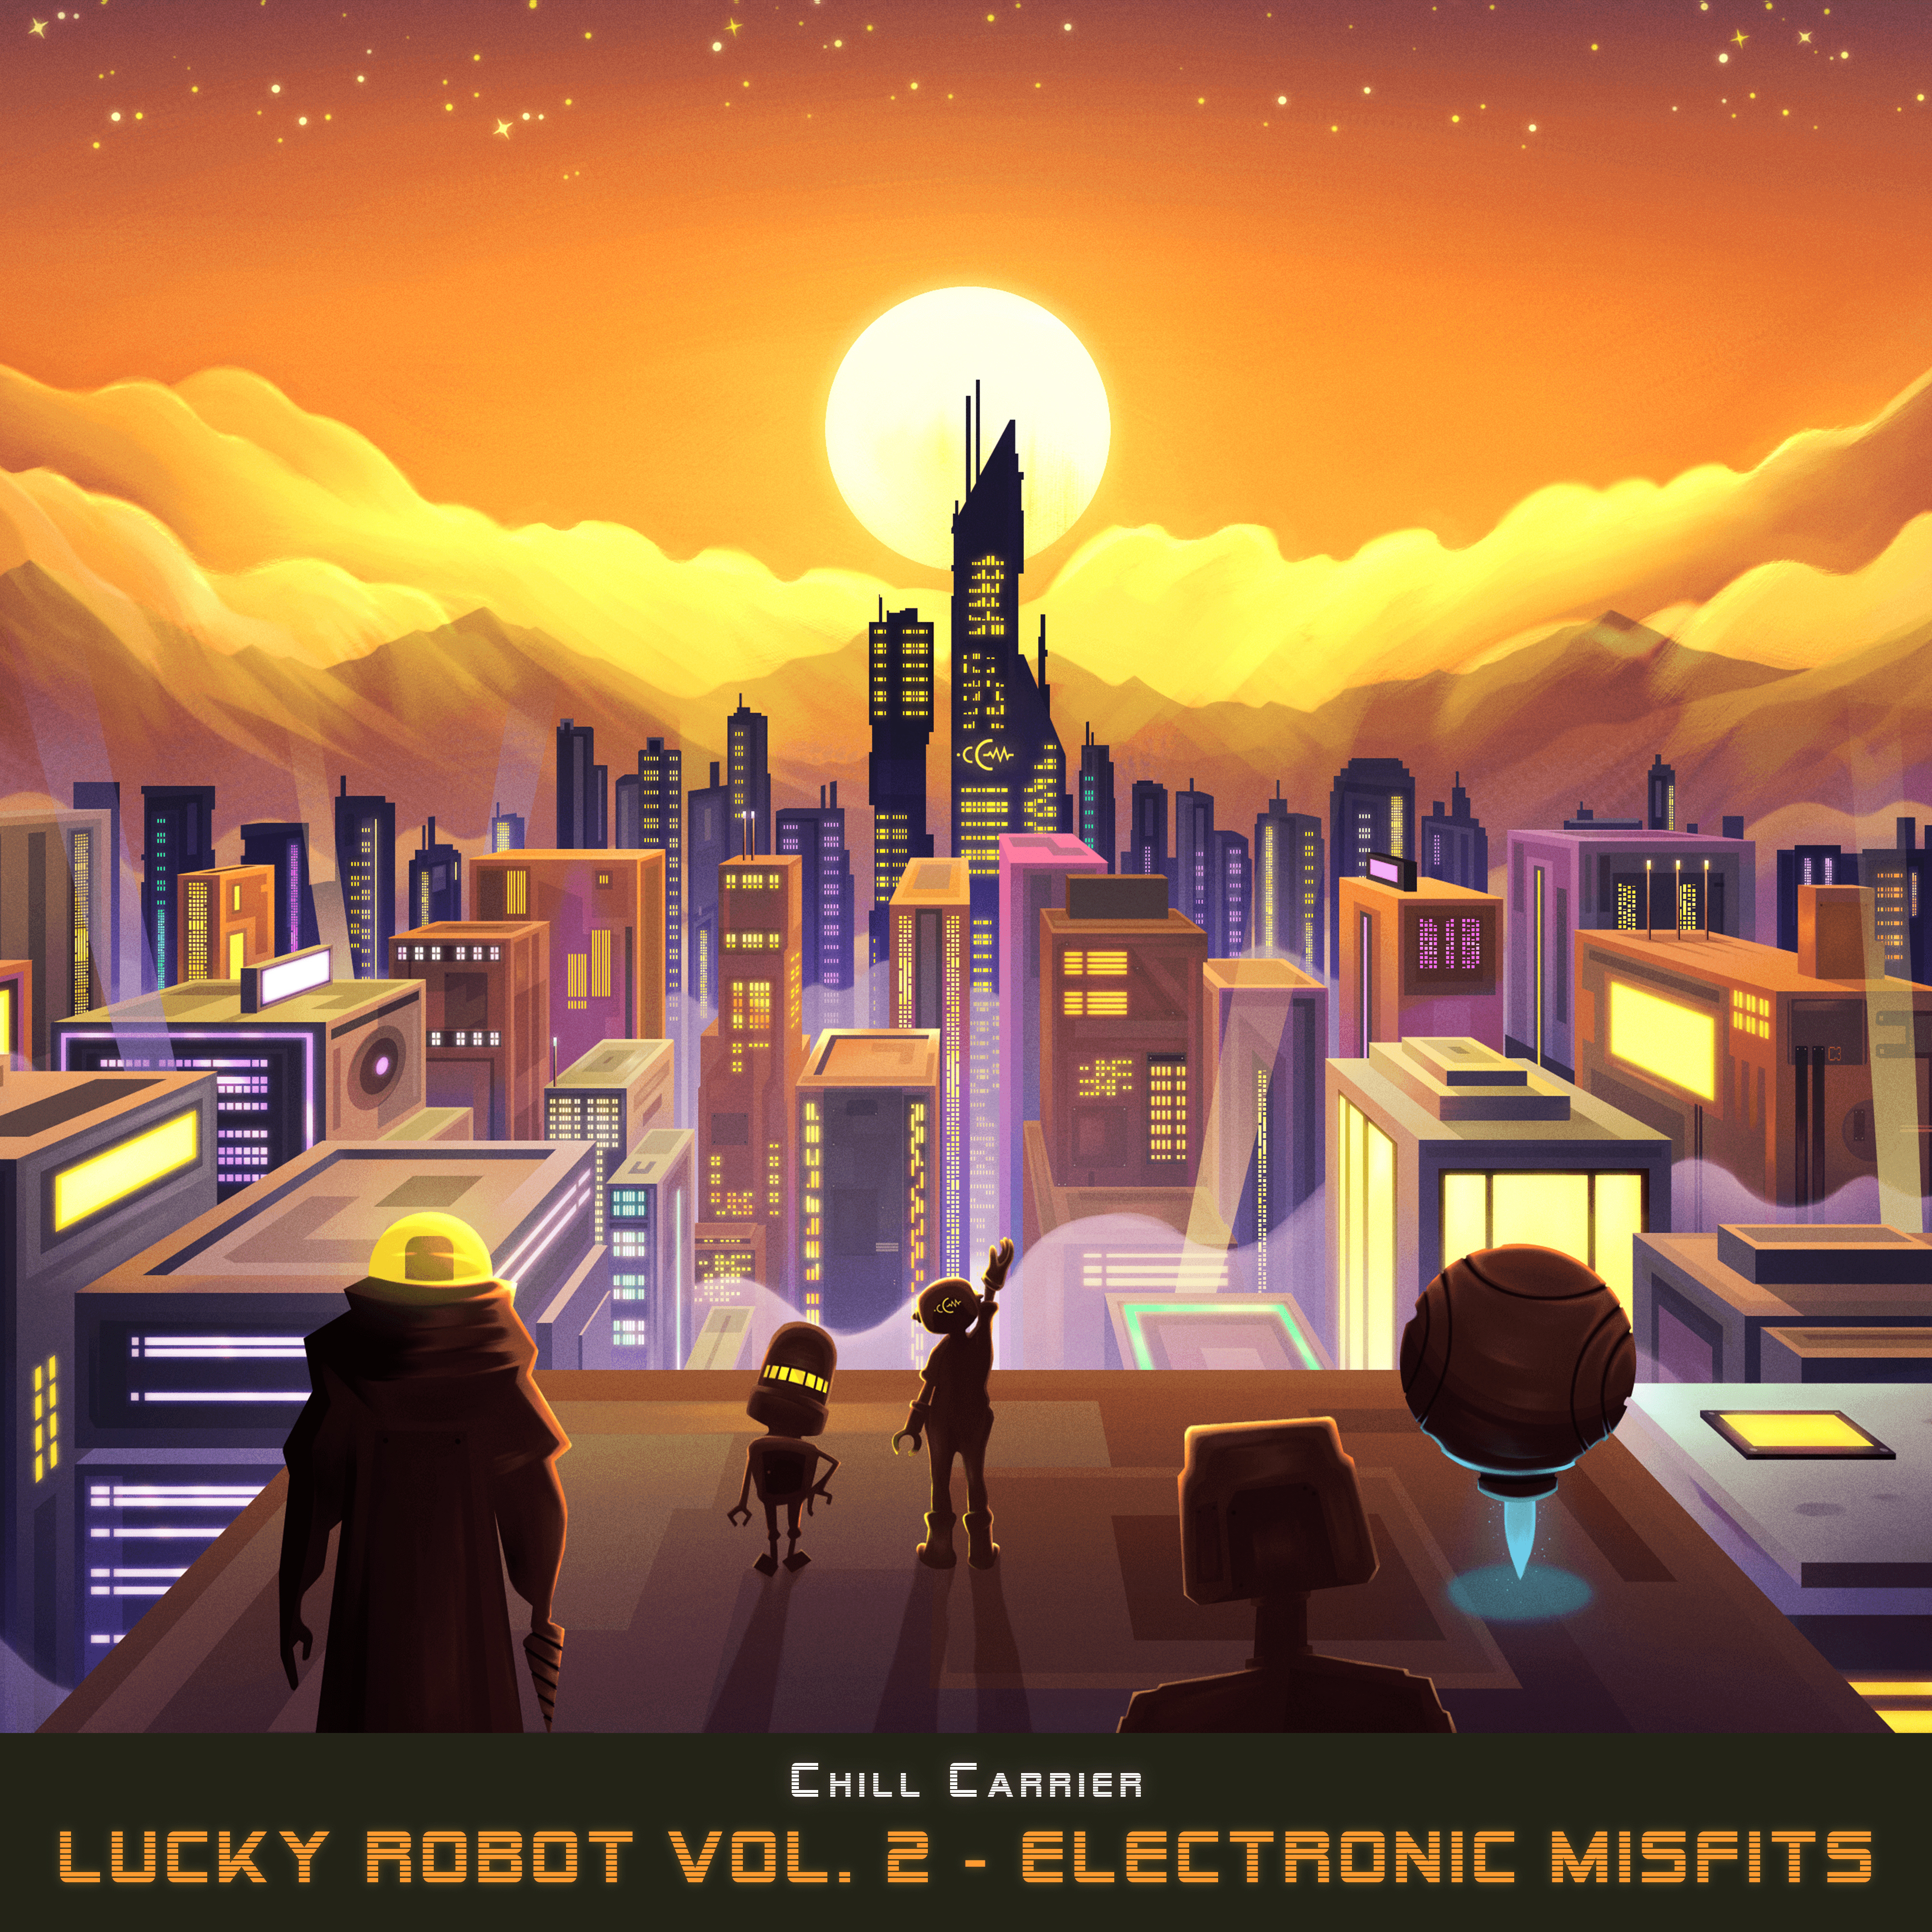 Lucky Robot, Vol. 2 - Electronic Misfits